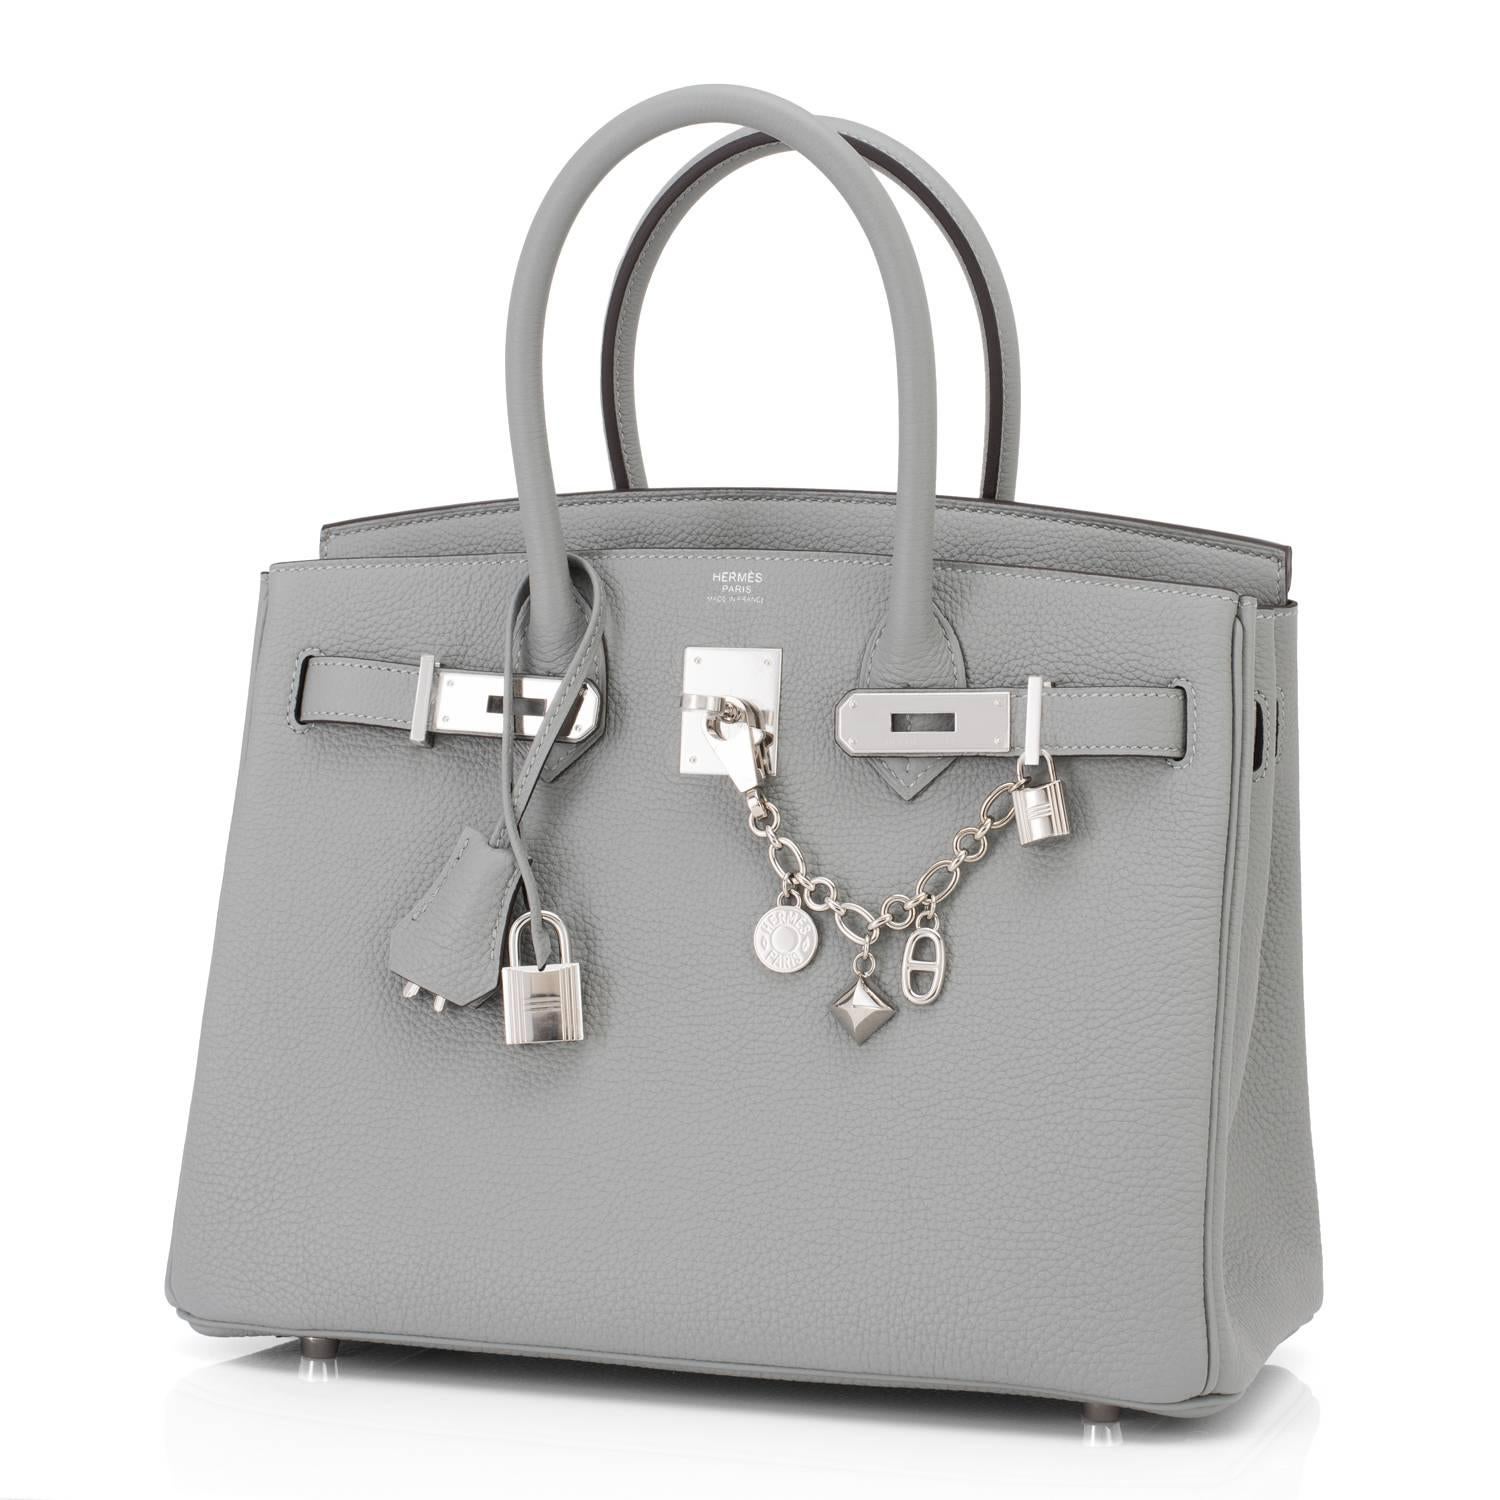 Hermes Gris Mouette New Grey 30cm Togo Birkin Bag Palladium So Chic
Brand New in Bpx.  Store fresh. Pristine condition (with plastic on hardware). 
Perfect gift! Comes with keys, lock, clochette, a sleeper for the bag, rain protector, and orange